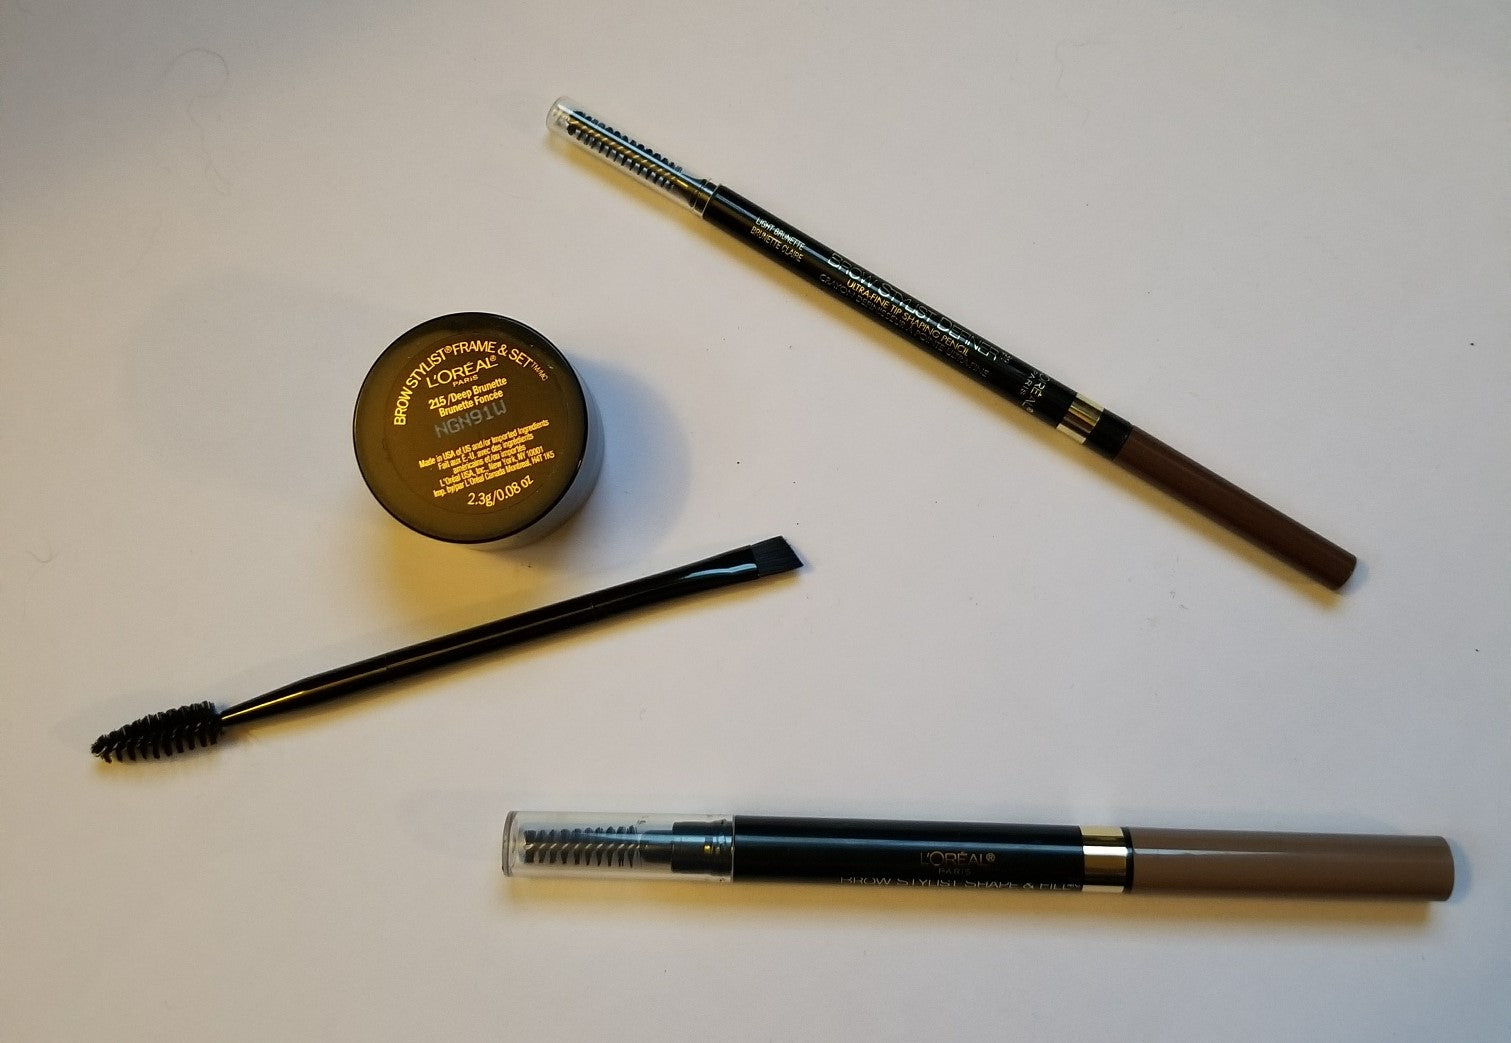 Review, Photos, Swatches, Makeup Trend 2017, 2018, 2019: L'Oreal Paris Brow Stylist, Frame and Set, Shape and Fill Pencil, Definer Pencil